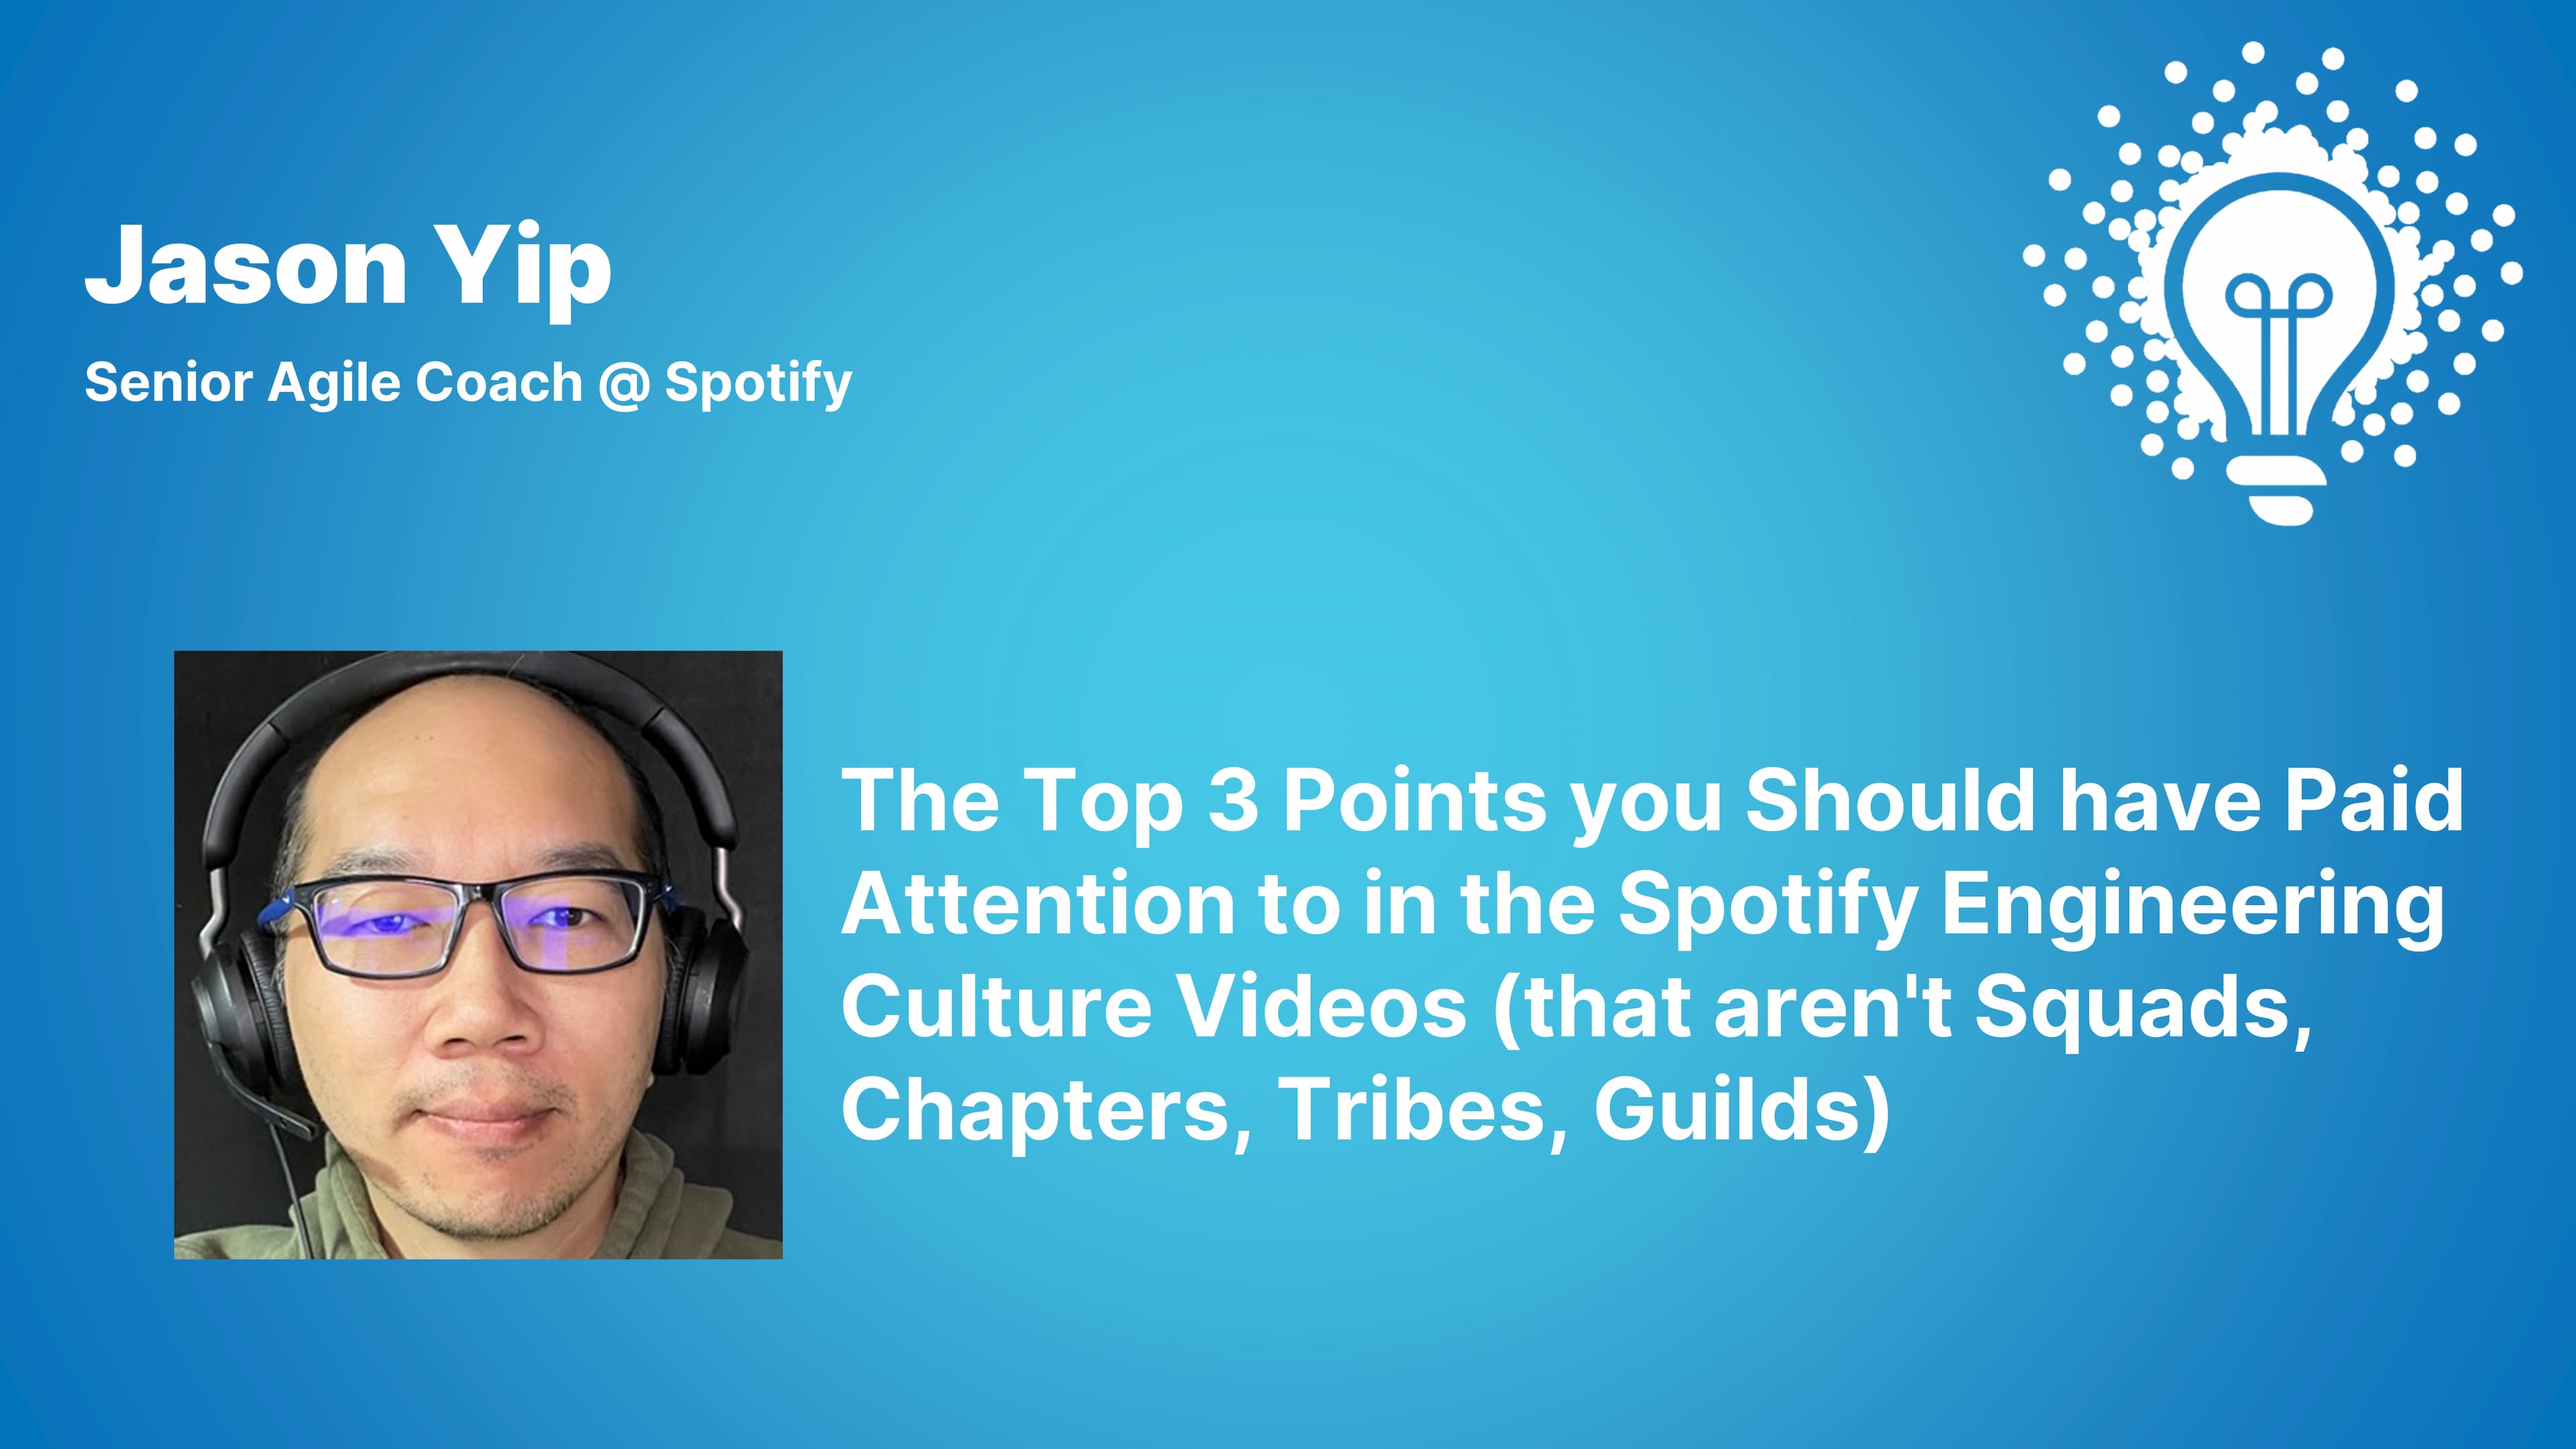 The Top 3 Points You Should Have Paid Attention to in the Spotify Engineering Culture Videos